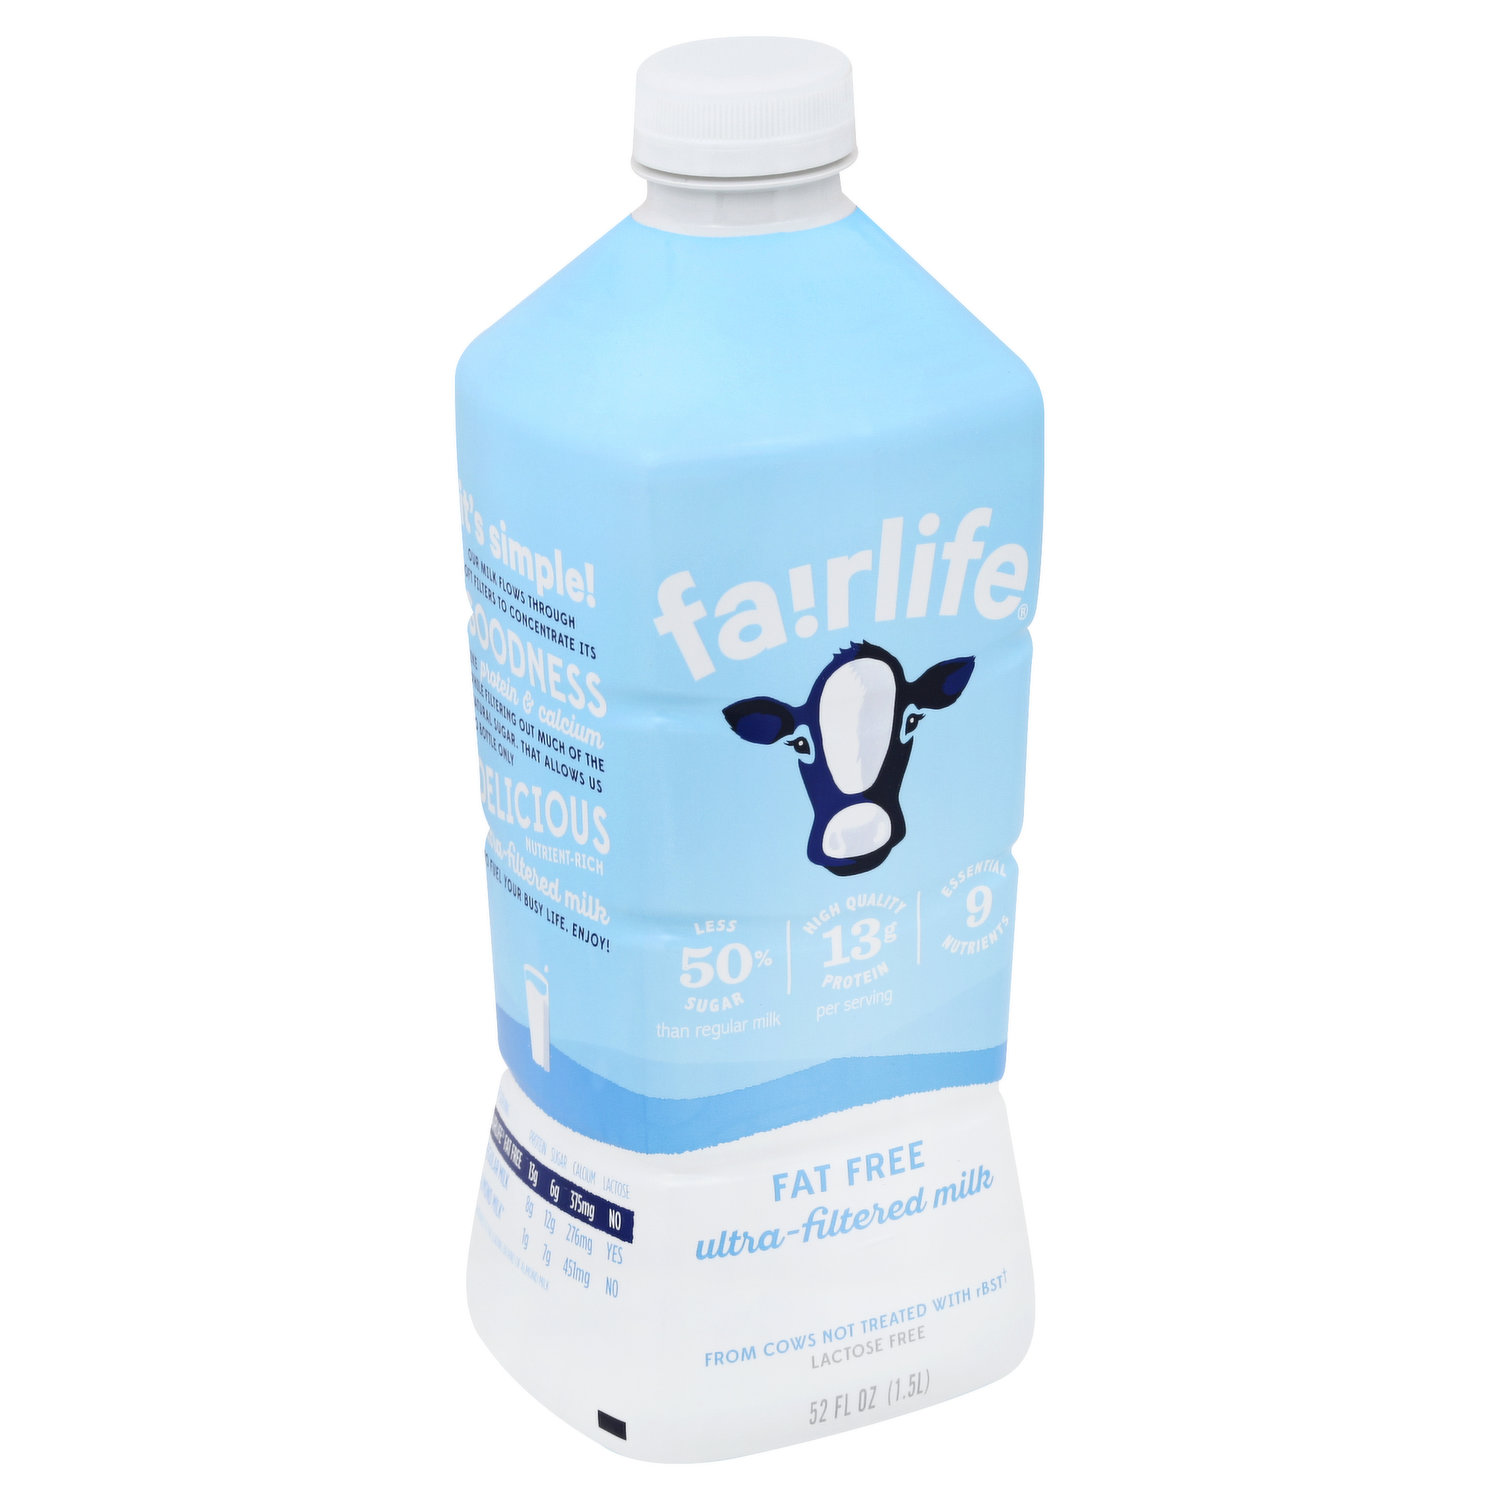 is all fairlife milk lactose free